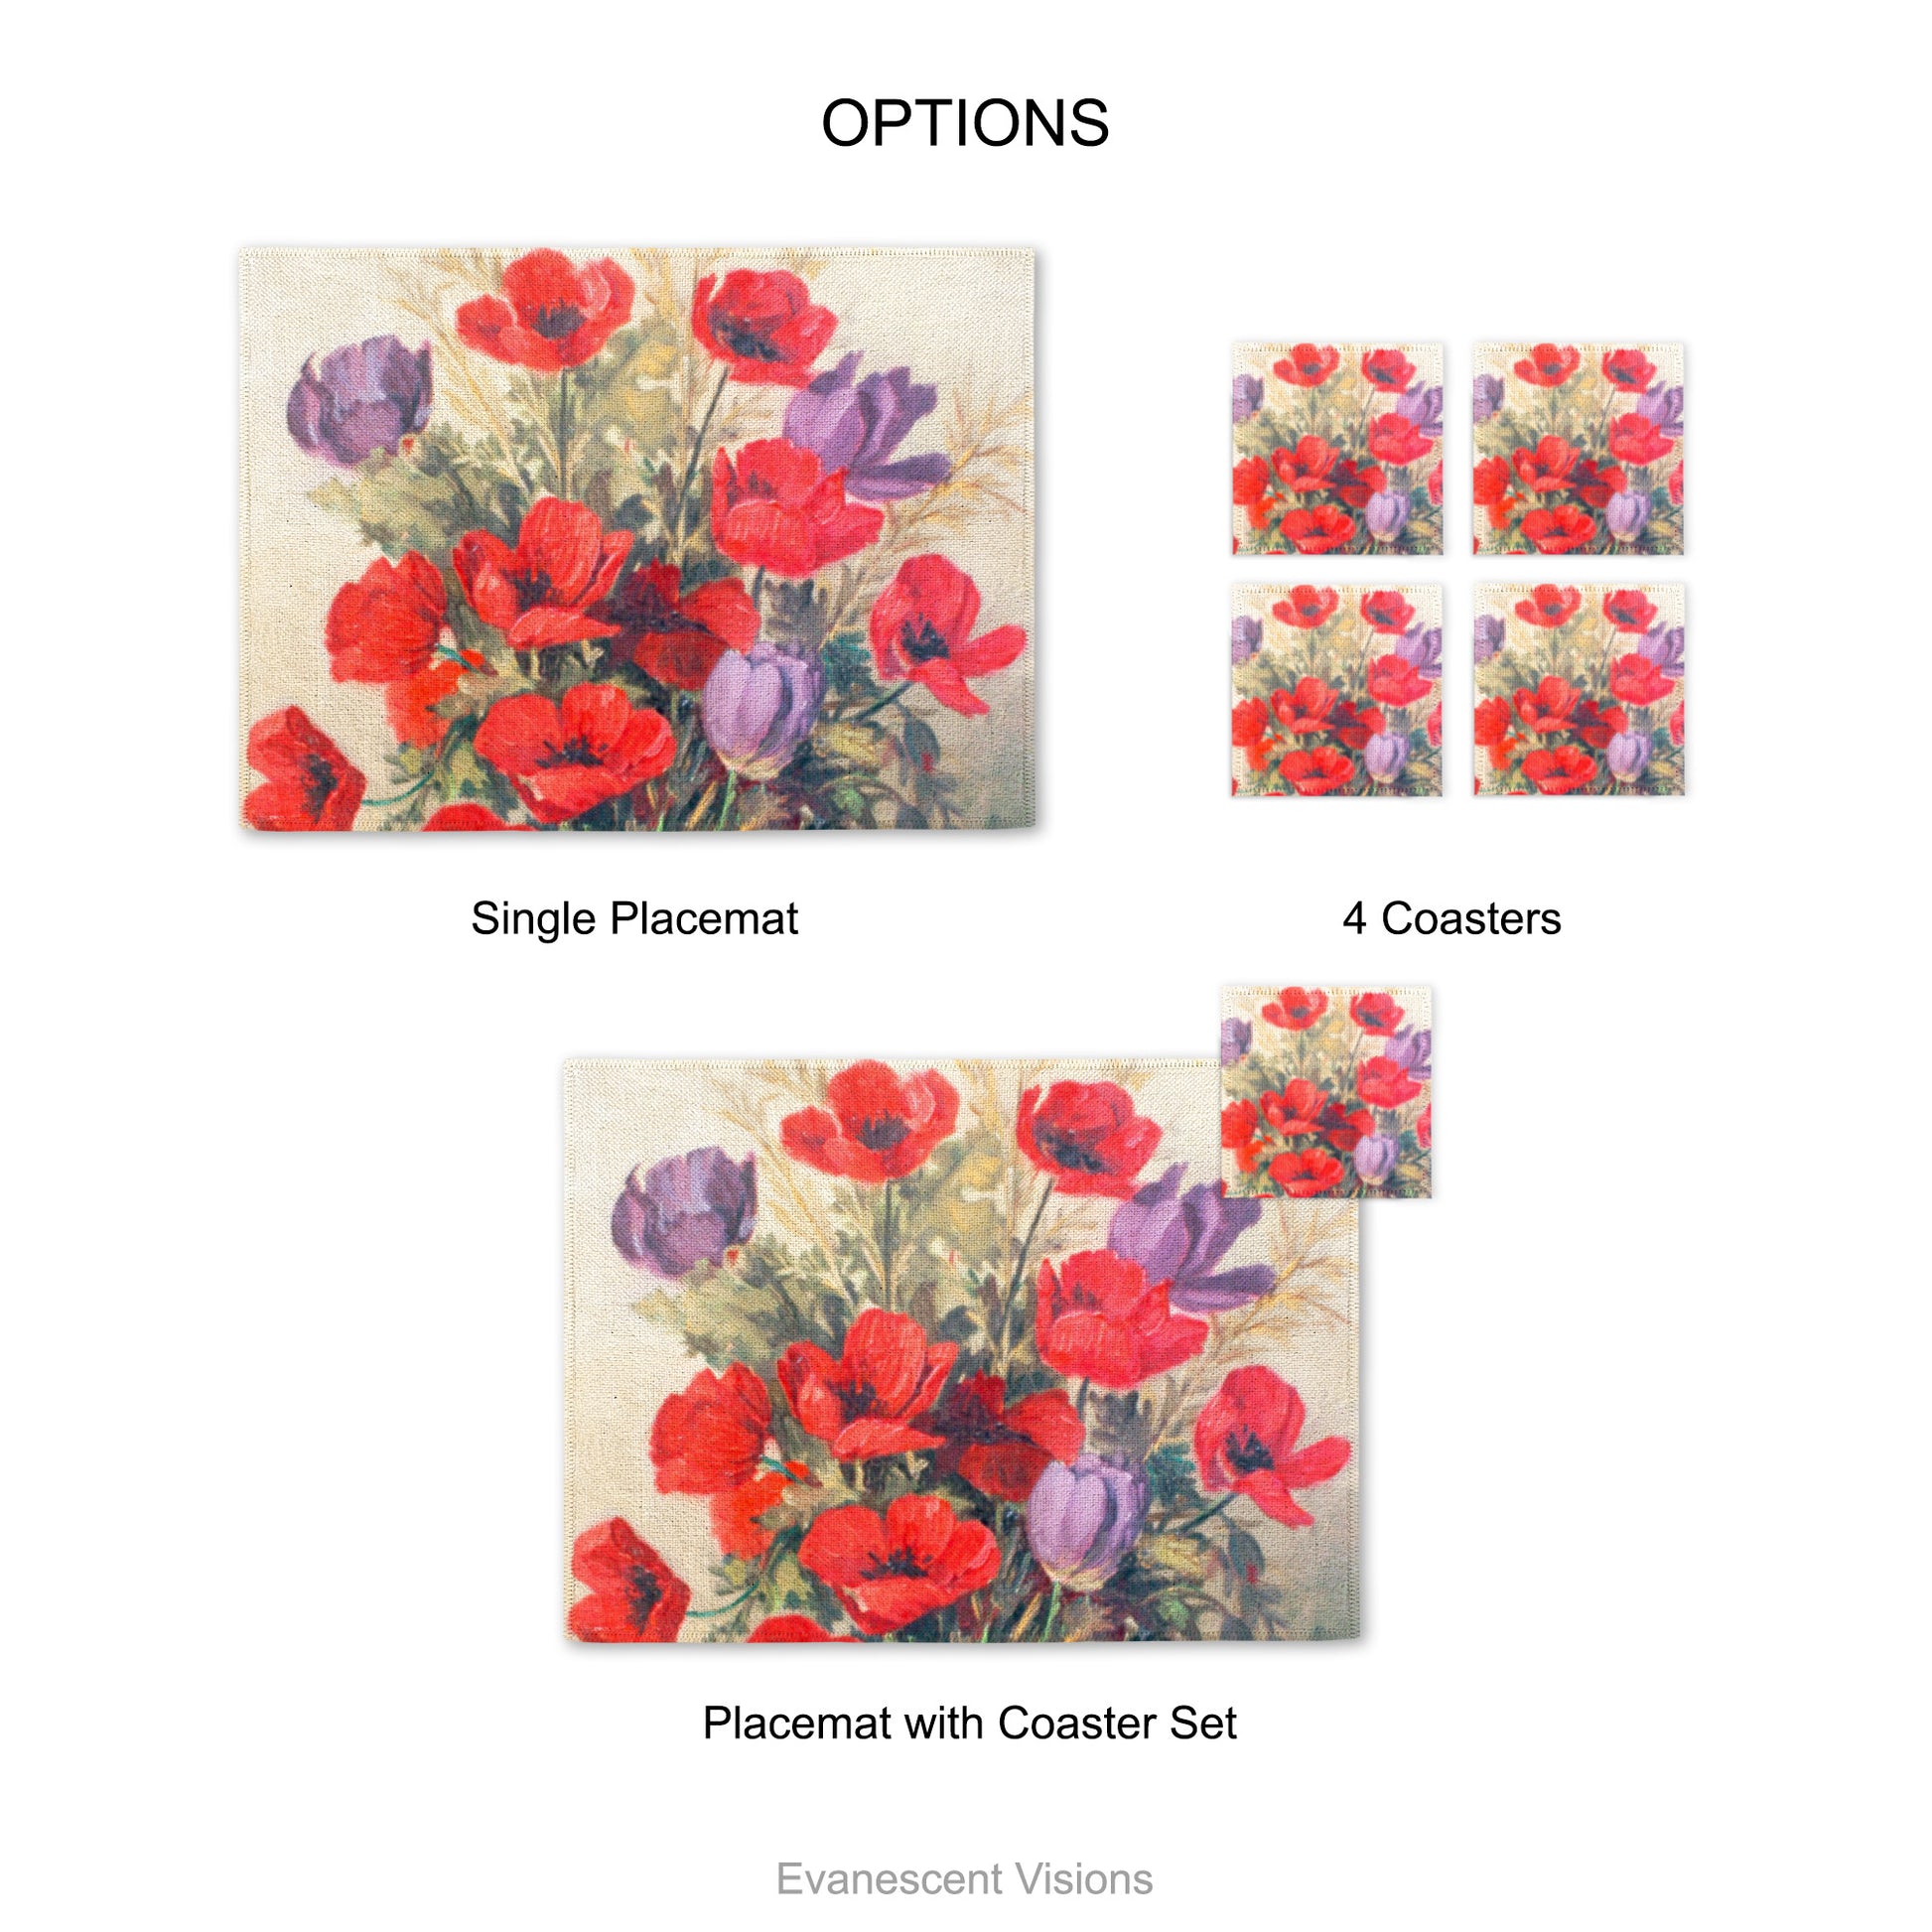 Placemat and coaster with design of red and purple poppies by early 20th century artist G.V. Geffen. Product options shows single placemat, set of 4 coasters and placemat with coaster set. 